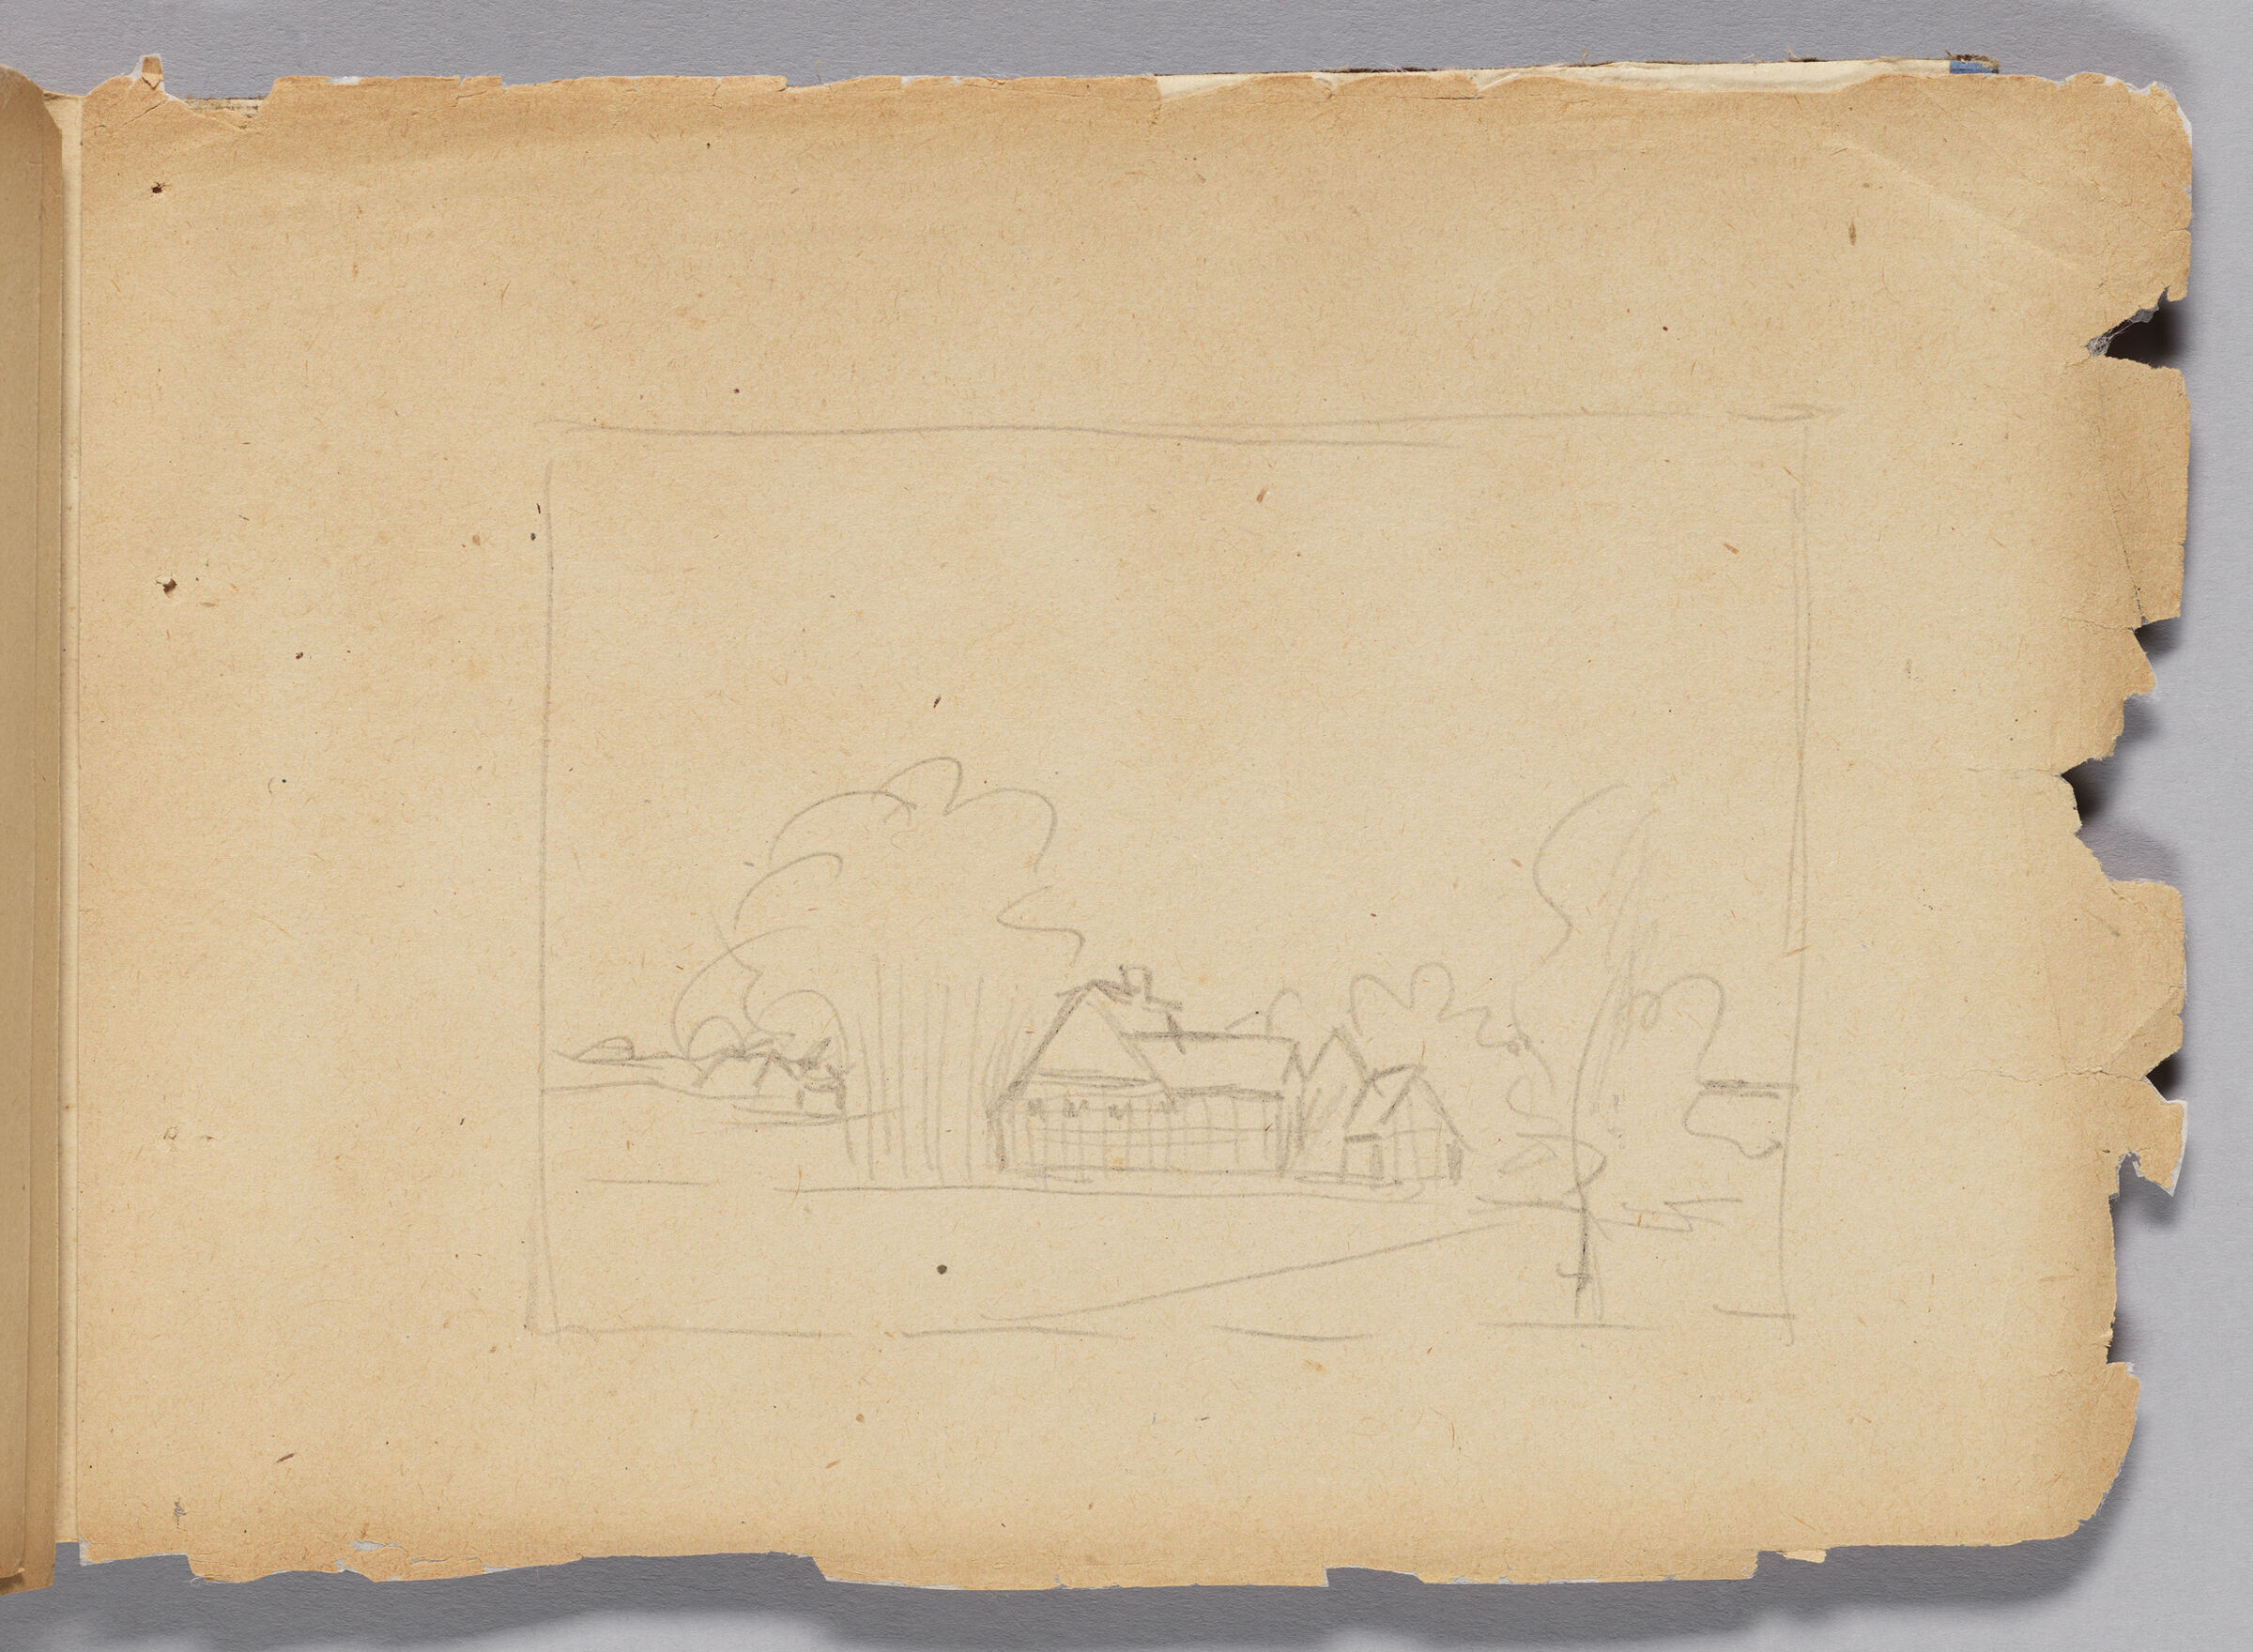 Untitled (Blank With Stray Marks, Left Page); Untitled (Farmhouse In Landscape, Right Page)